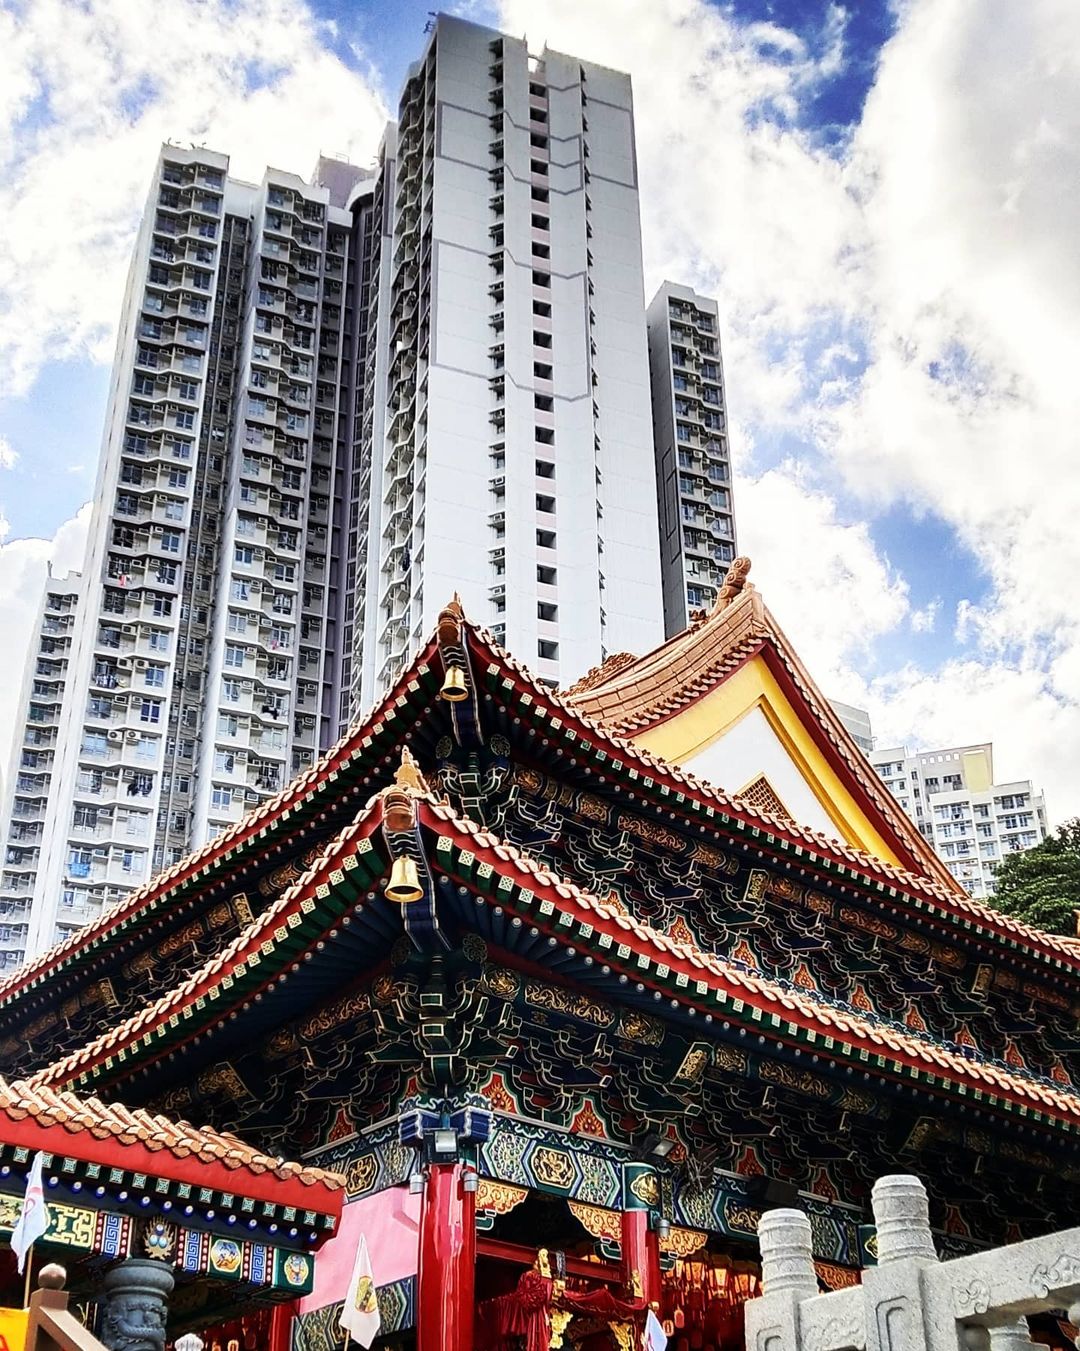 The big contrast between modern public housing and traditional Wong Tai Sin Temple.